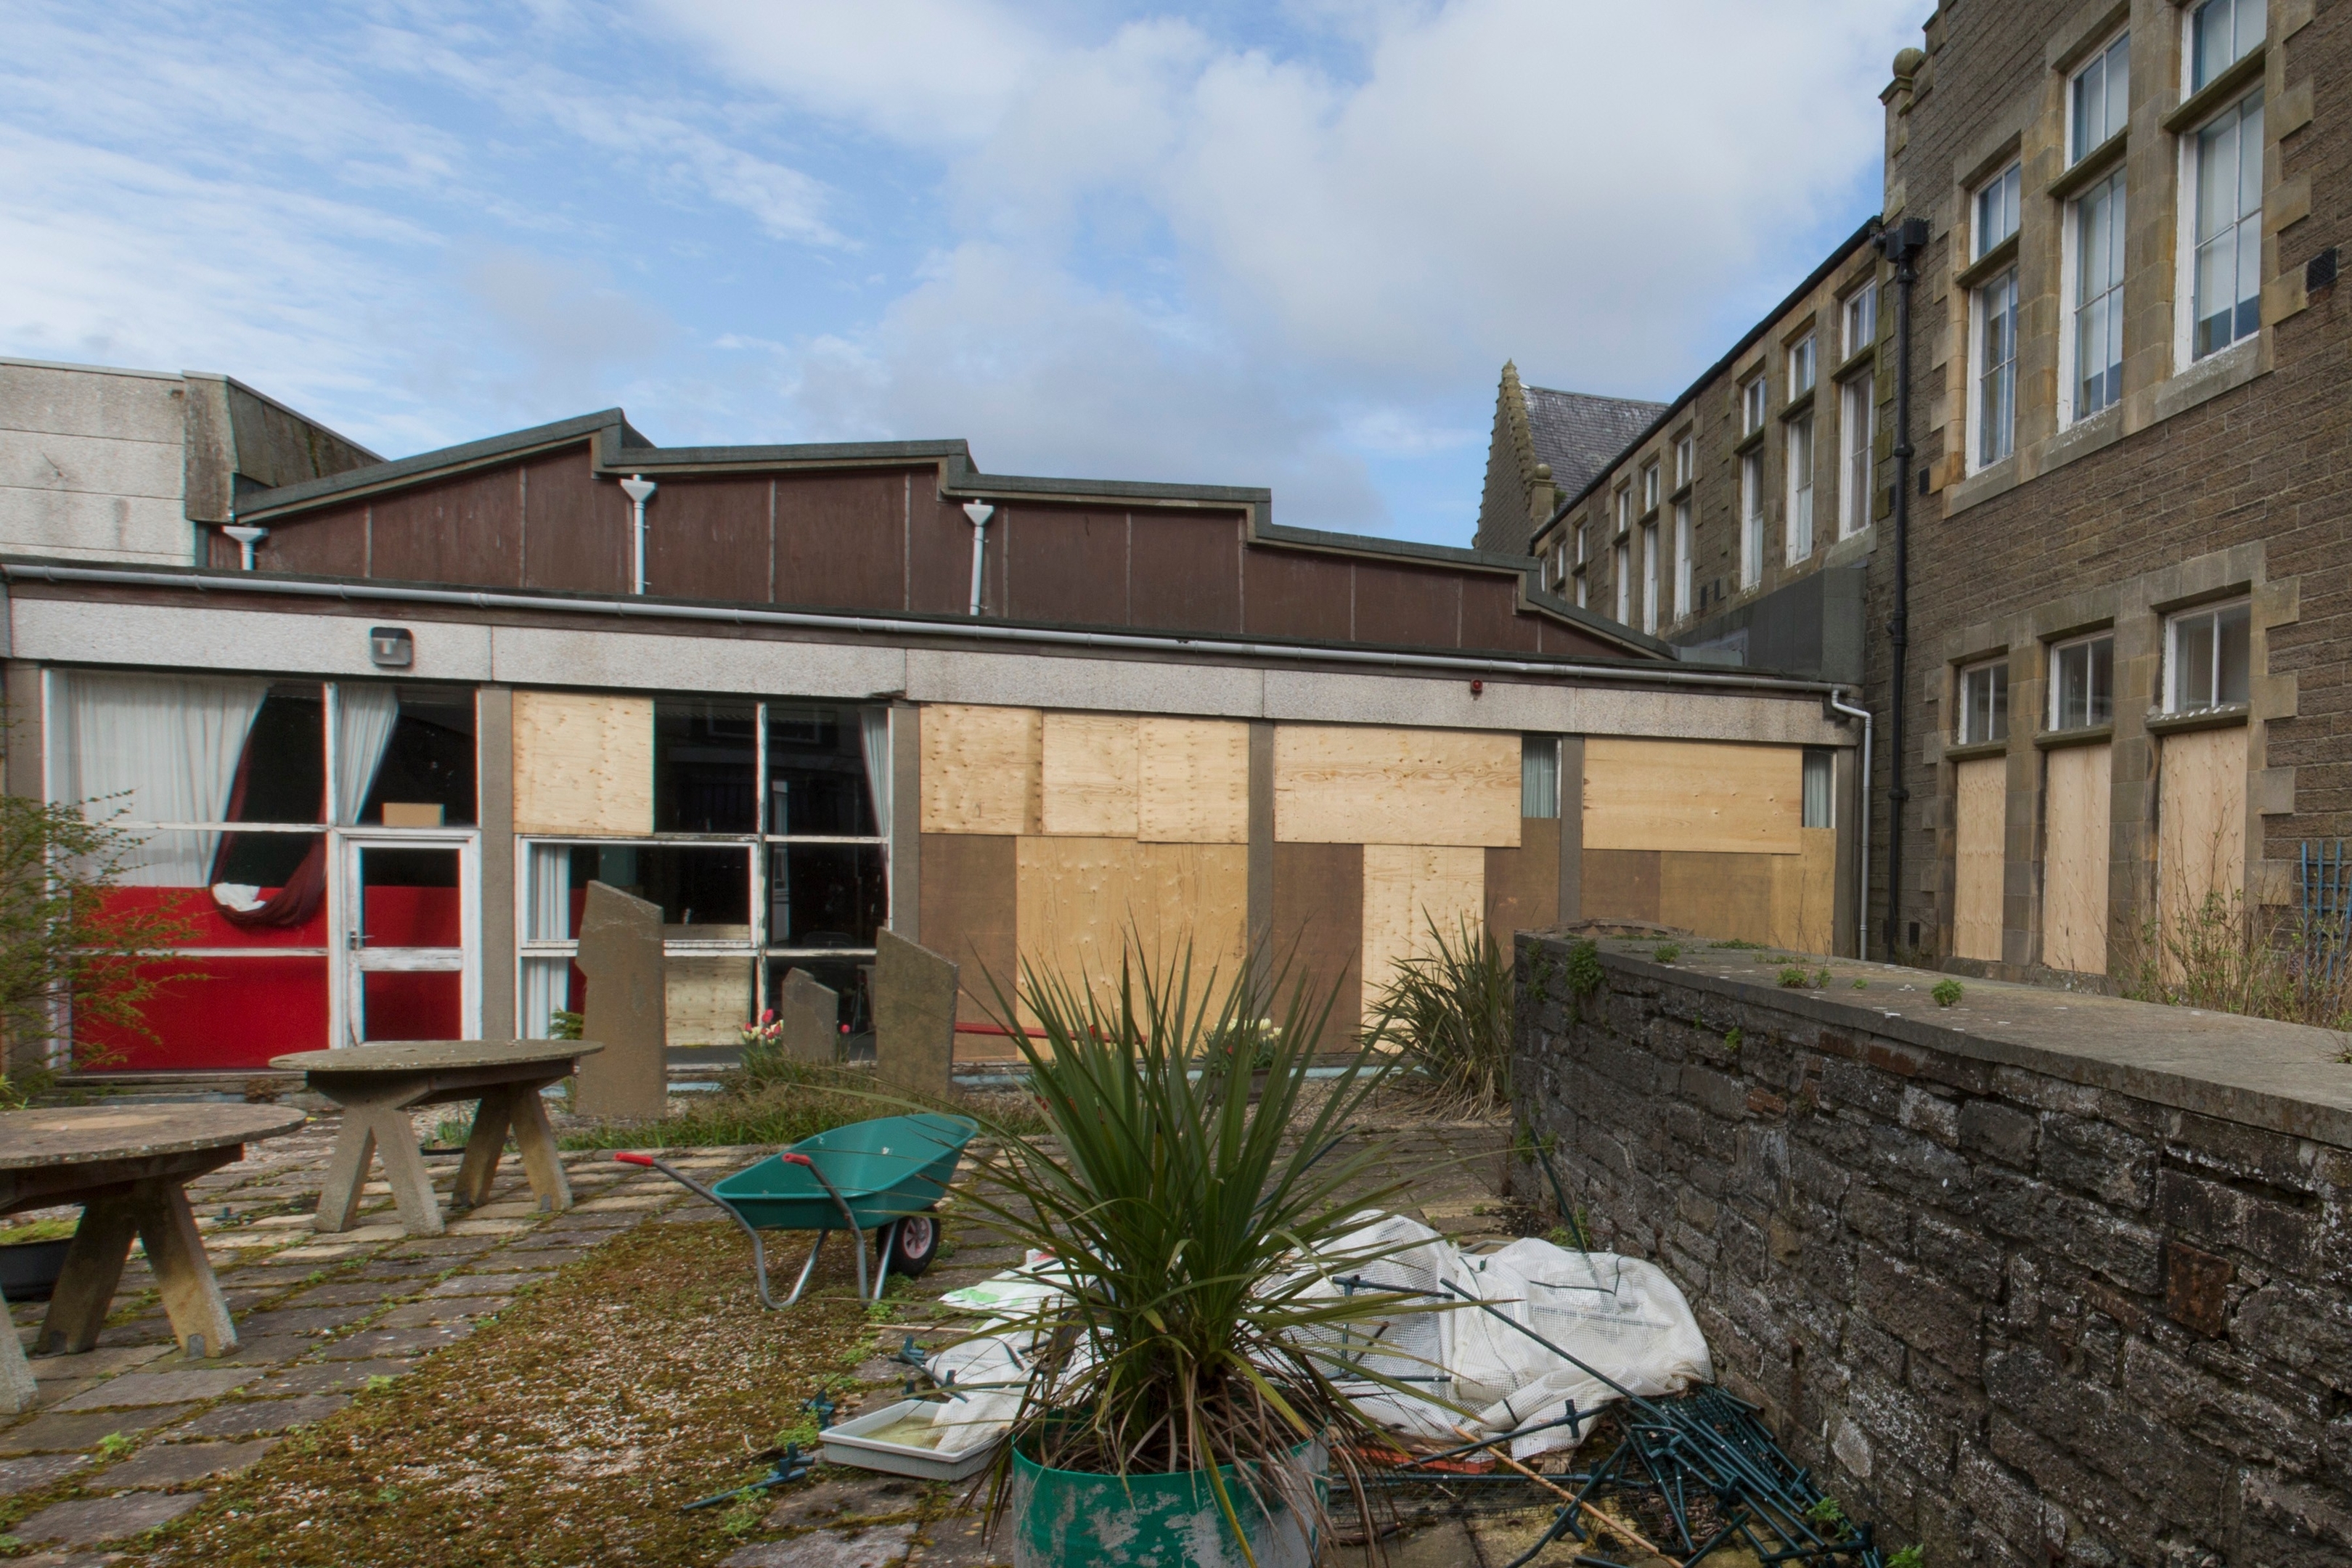 Some of the large windows at the side of the school hall were among the 30 broken at Wick High School.